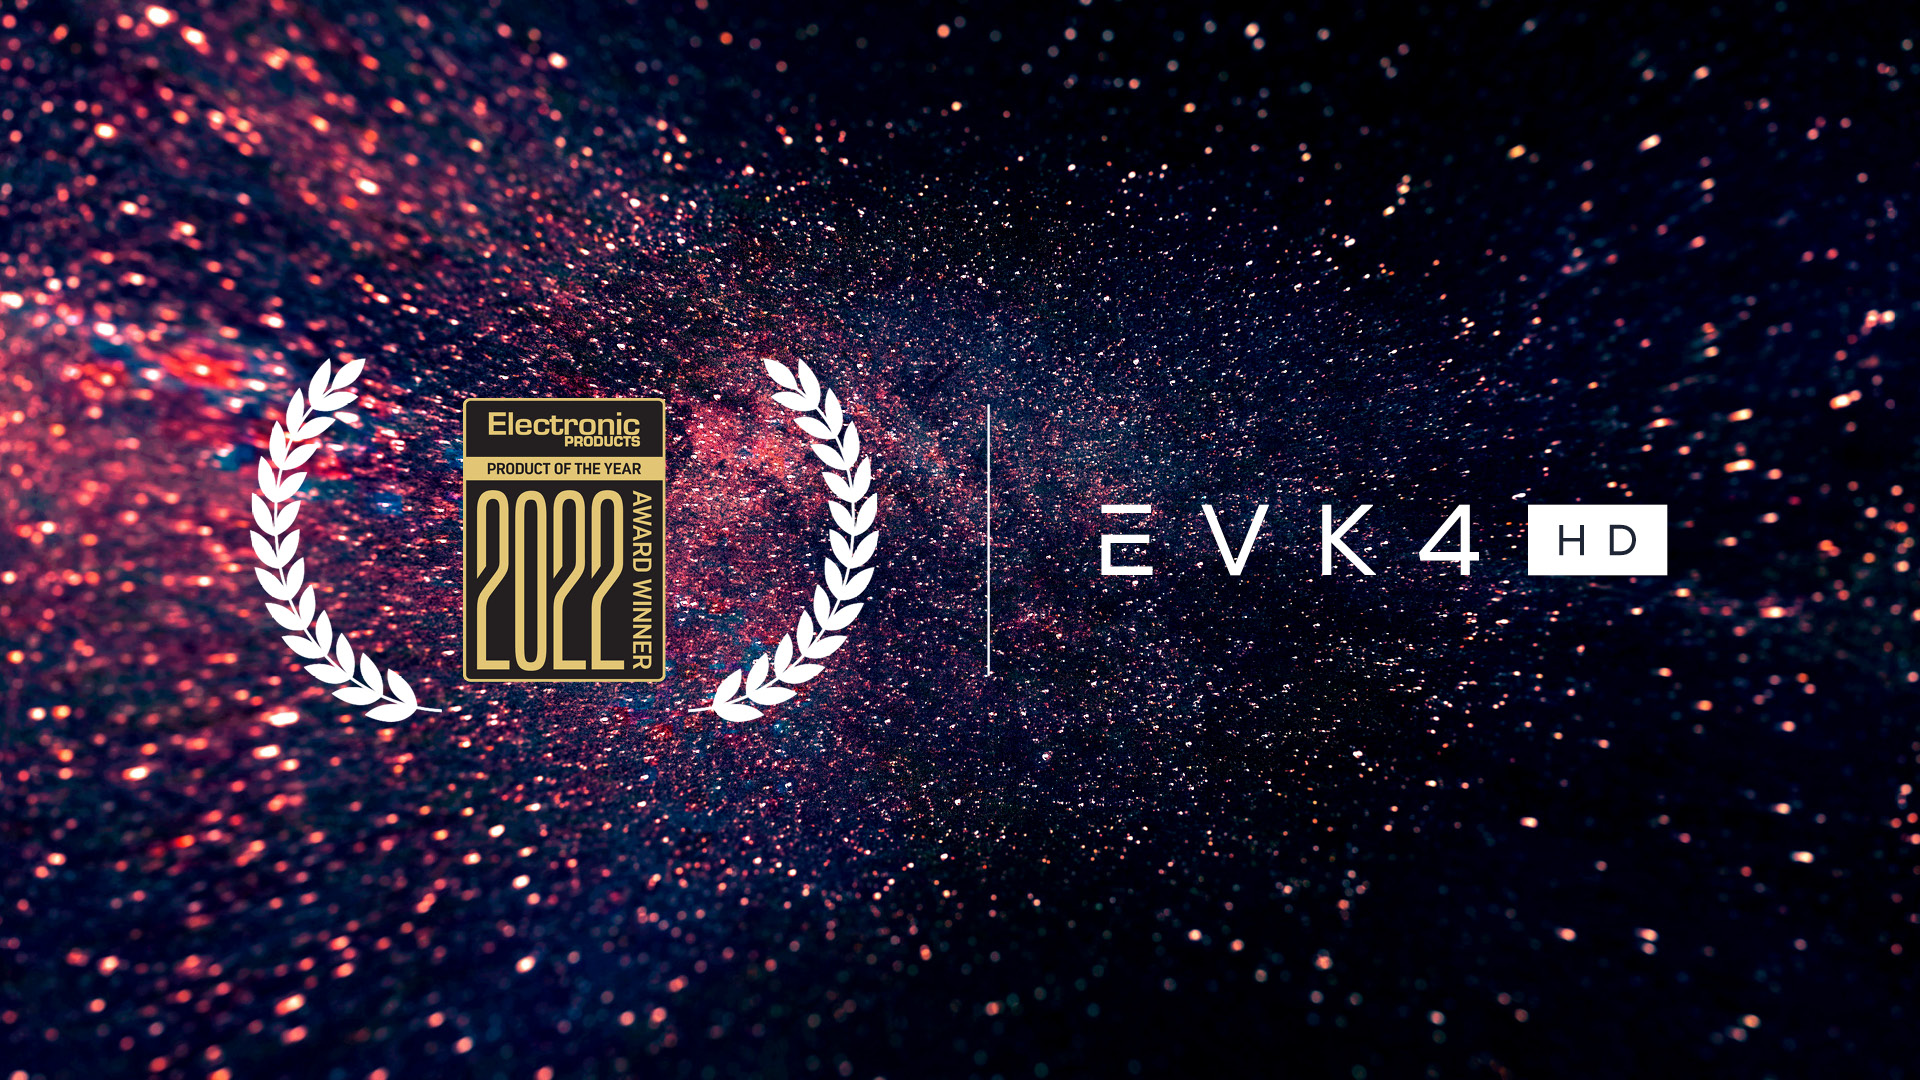 EVK4 wins Product of the Year Award by Electronic Products